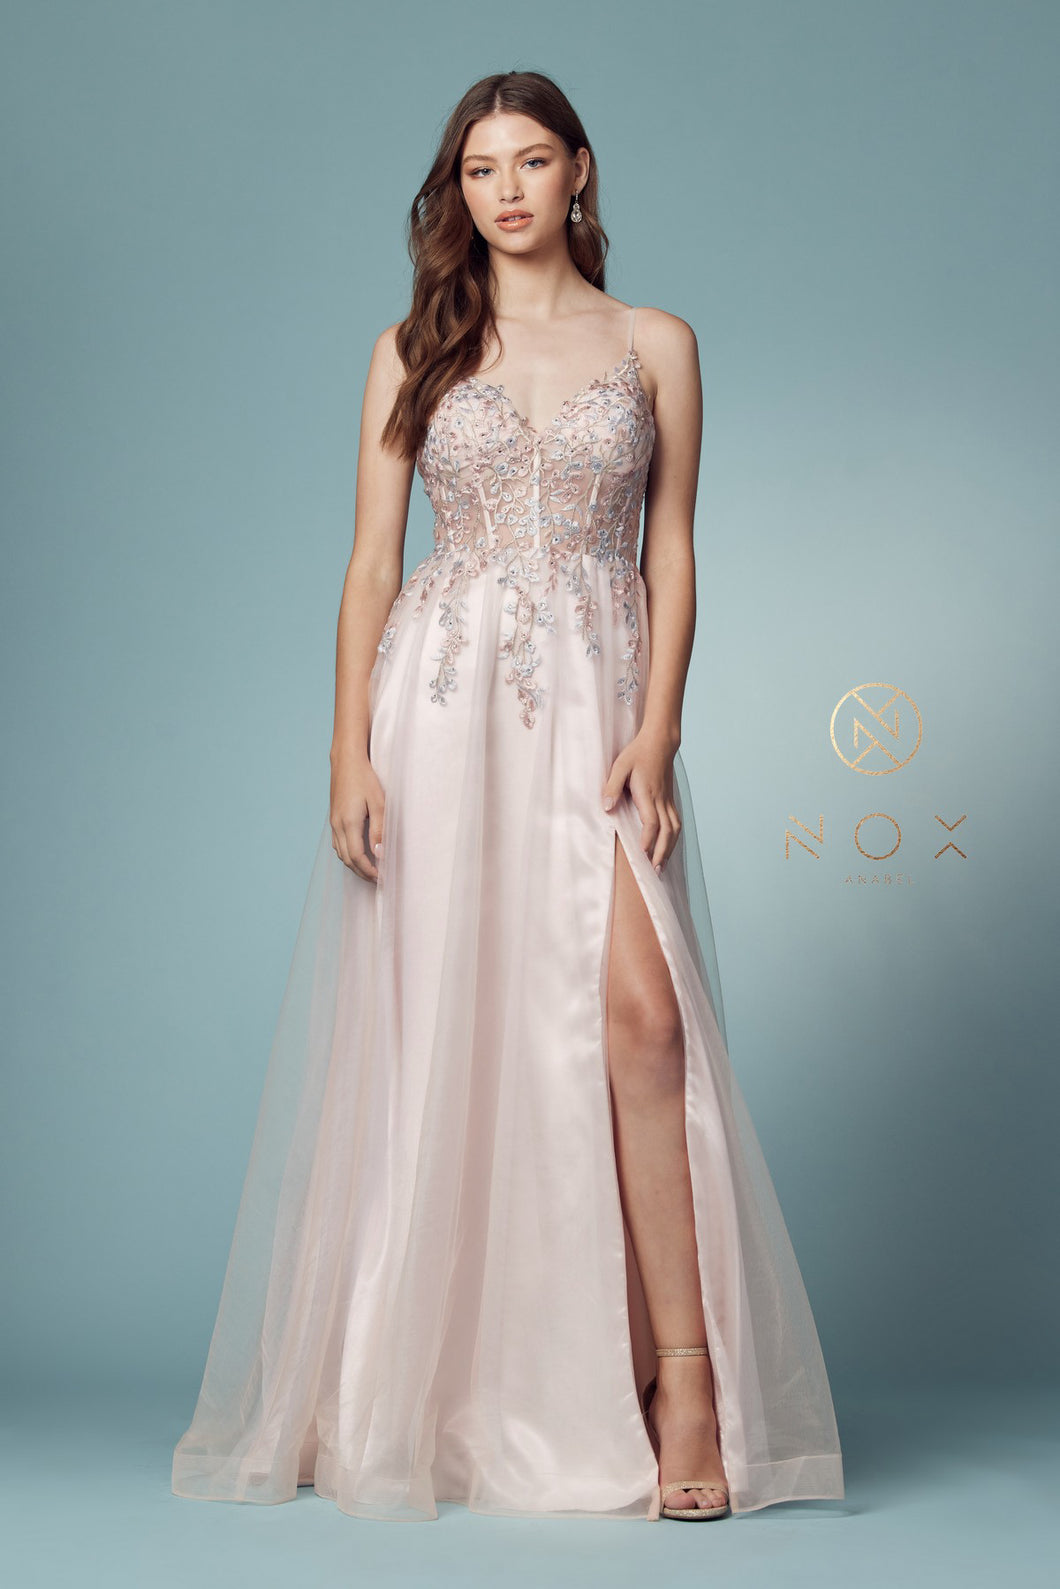 N S1015 - V-Neck Corset and Illusion Bodice A-Line Prom Gown with Lace Applique Top and Leg Slit Prom Dress Nox 2 BLUSH 